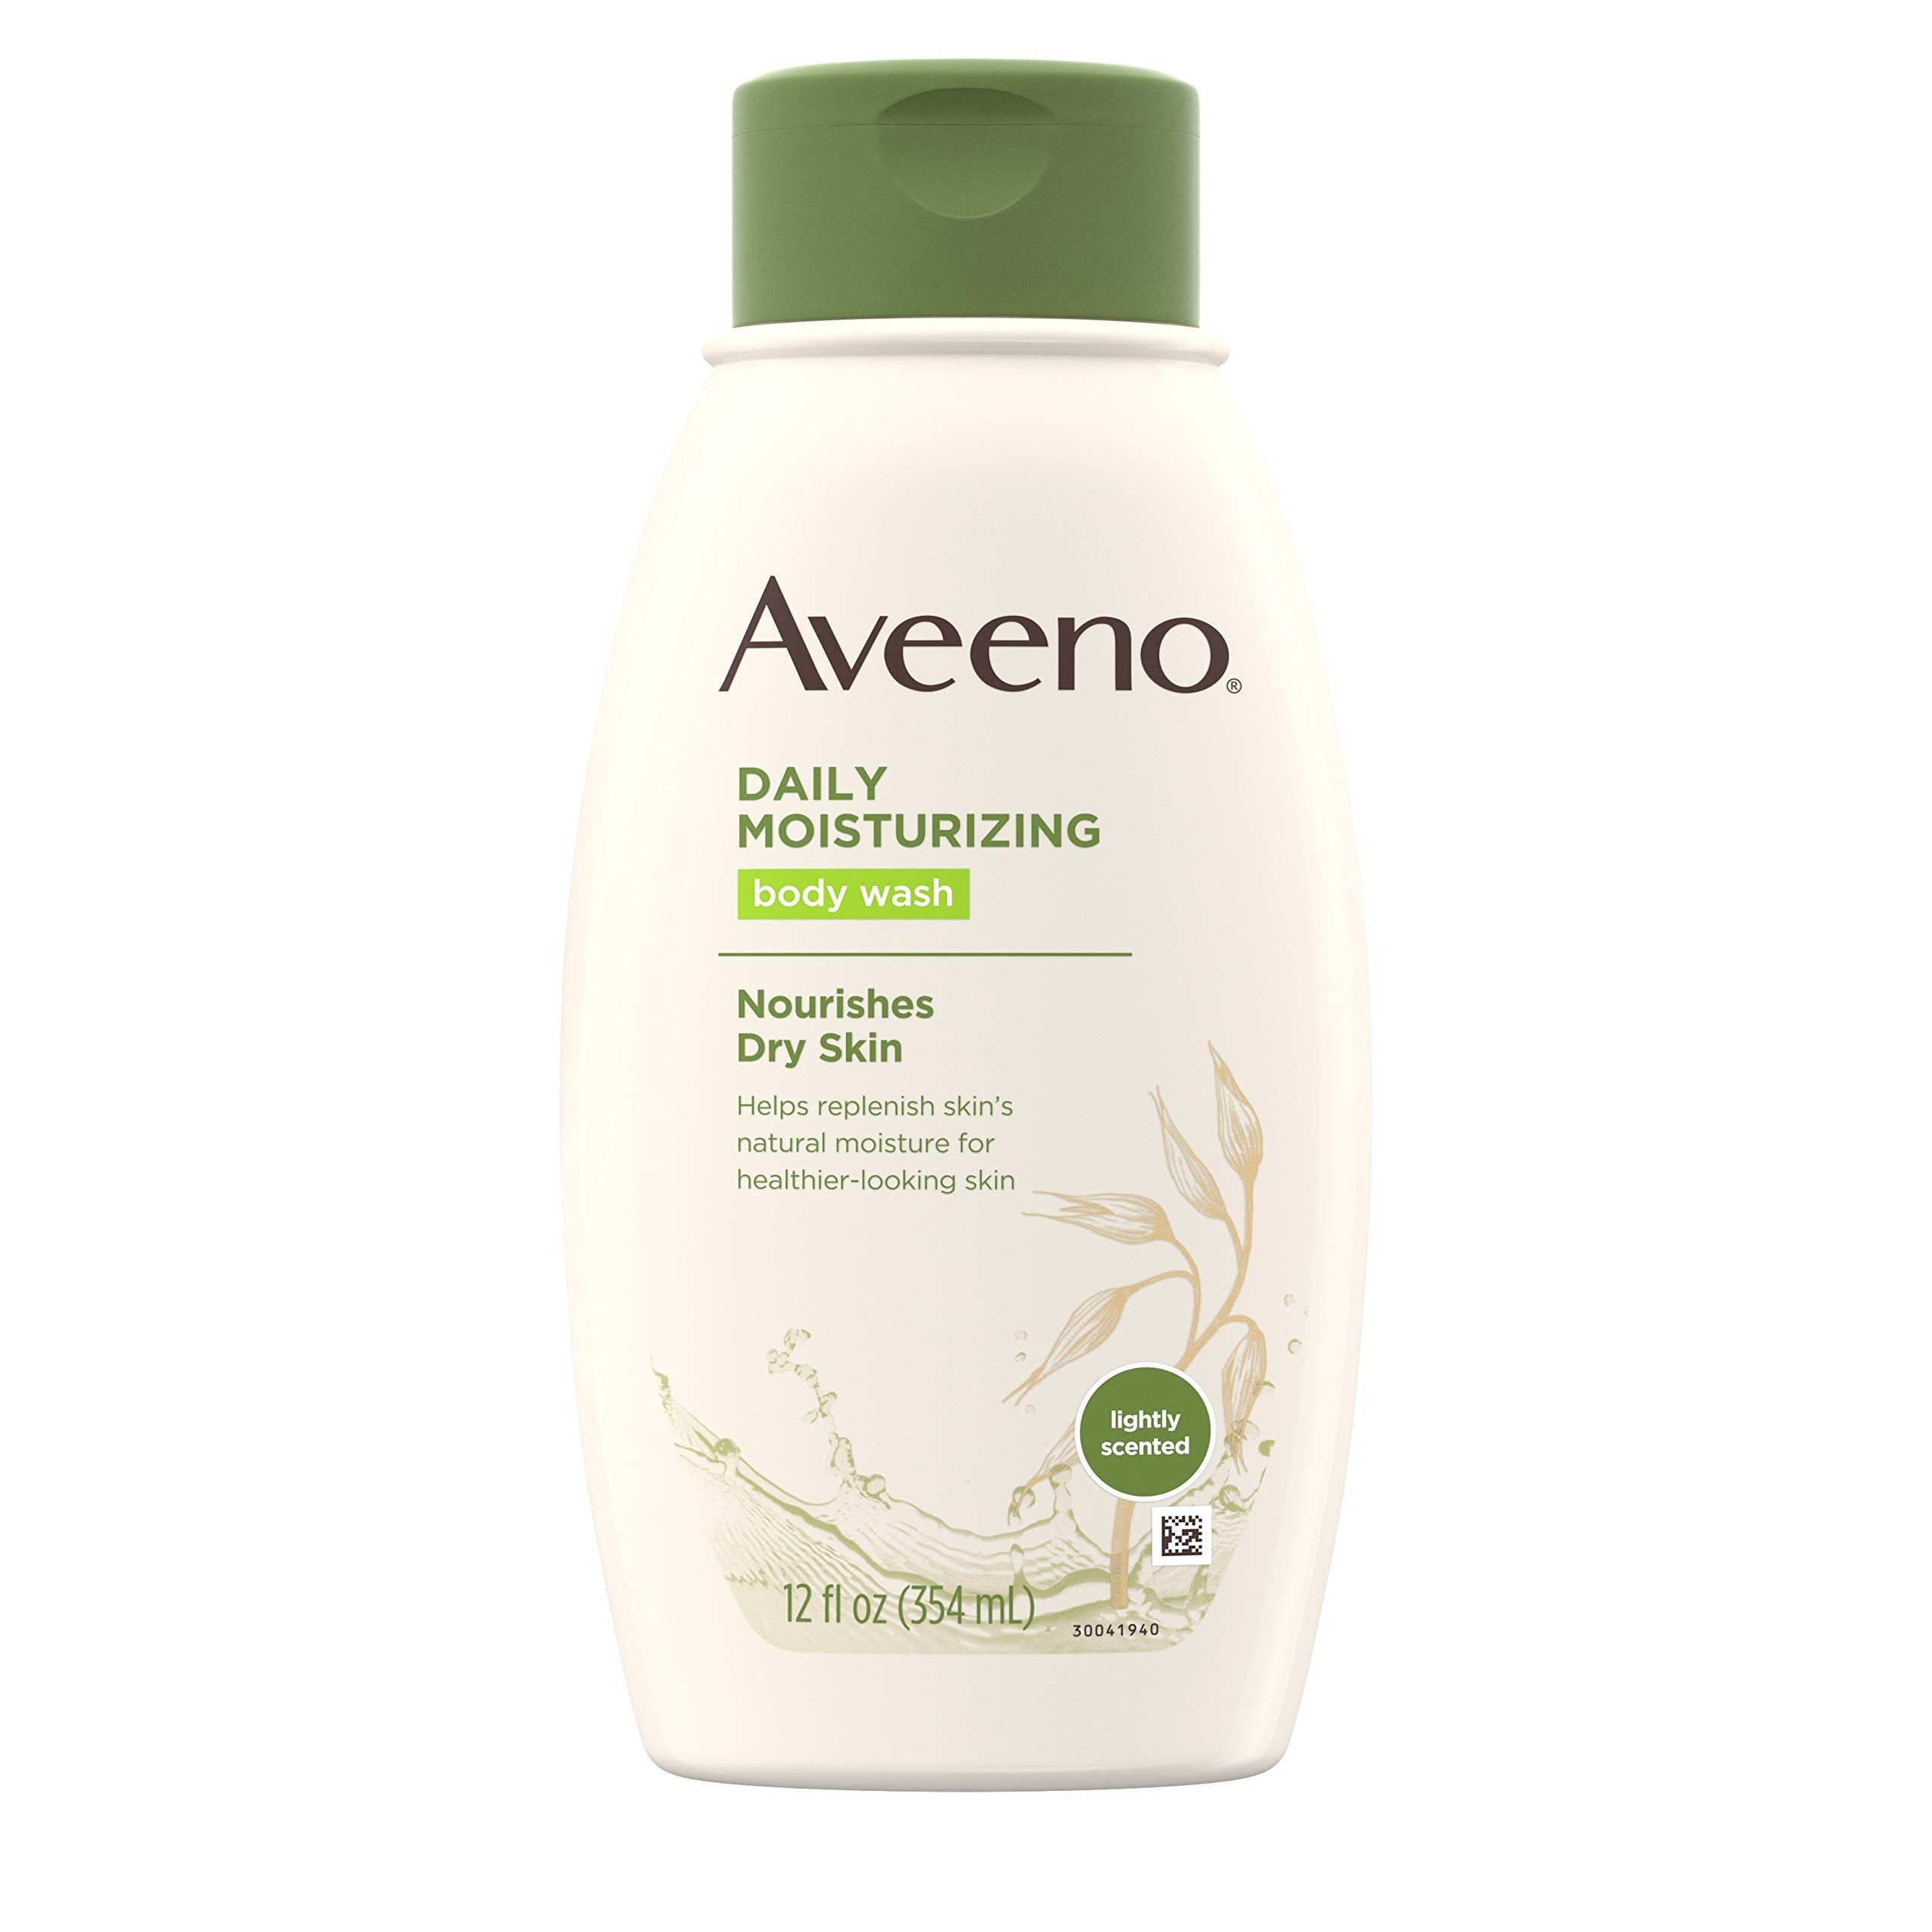 AVEENO The Gift Of Nourished And Hydrated Skin